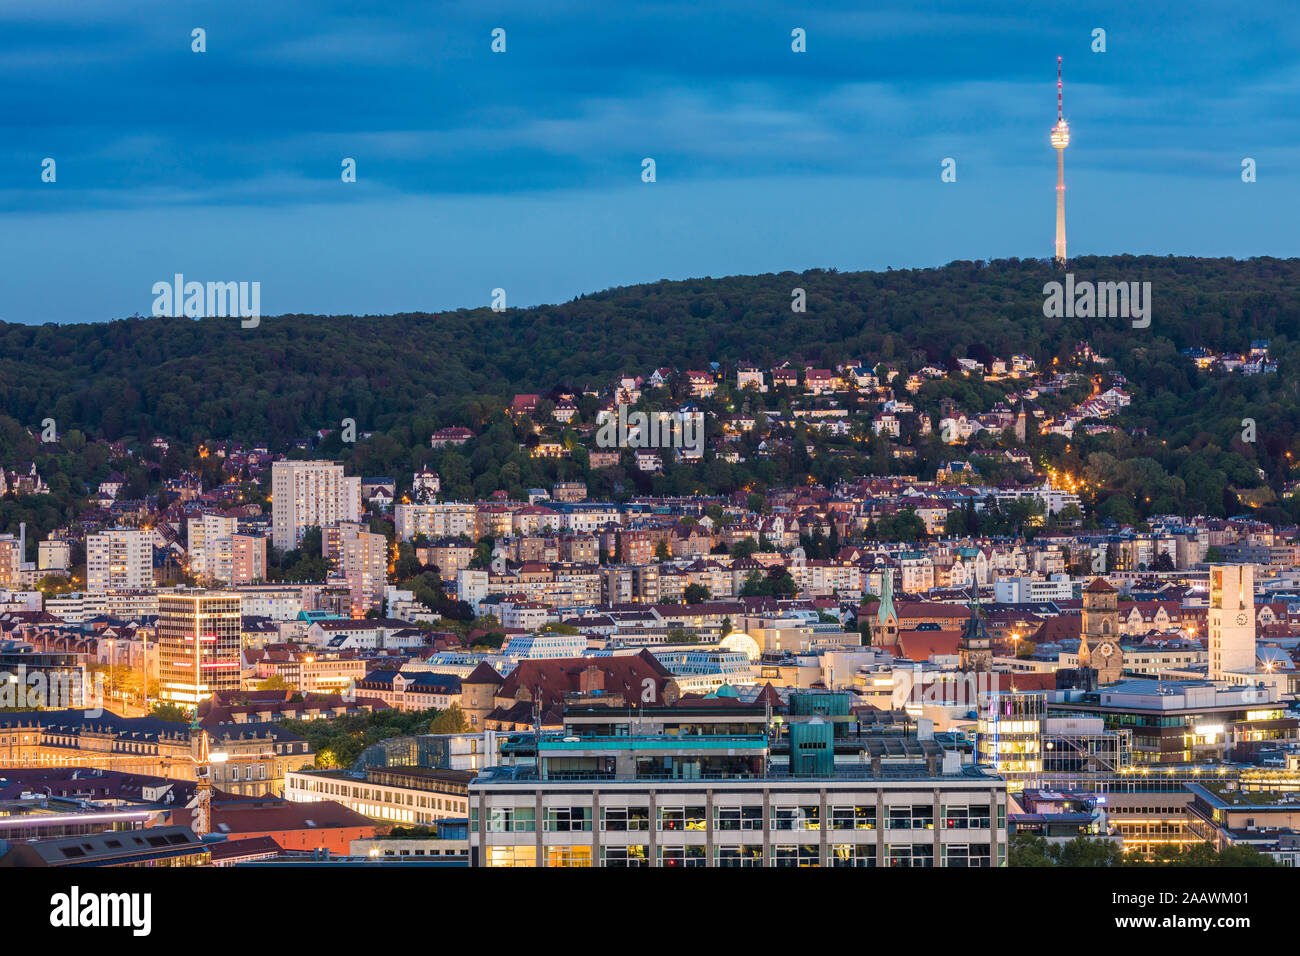 Exterior of illuminated buildings and communications tower against sky at dusk in Stuttgart, Germany Stock Photo